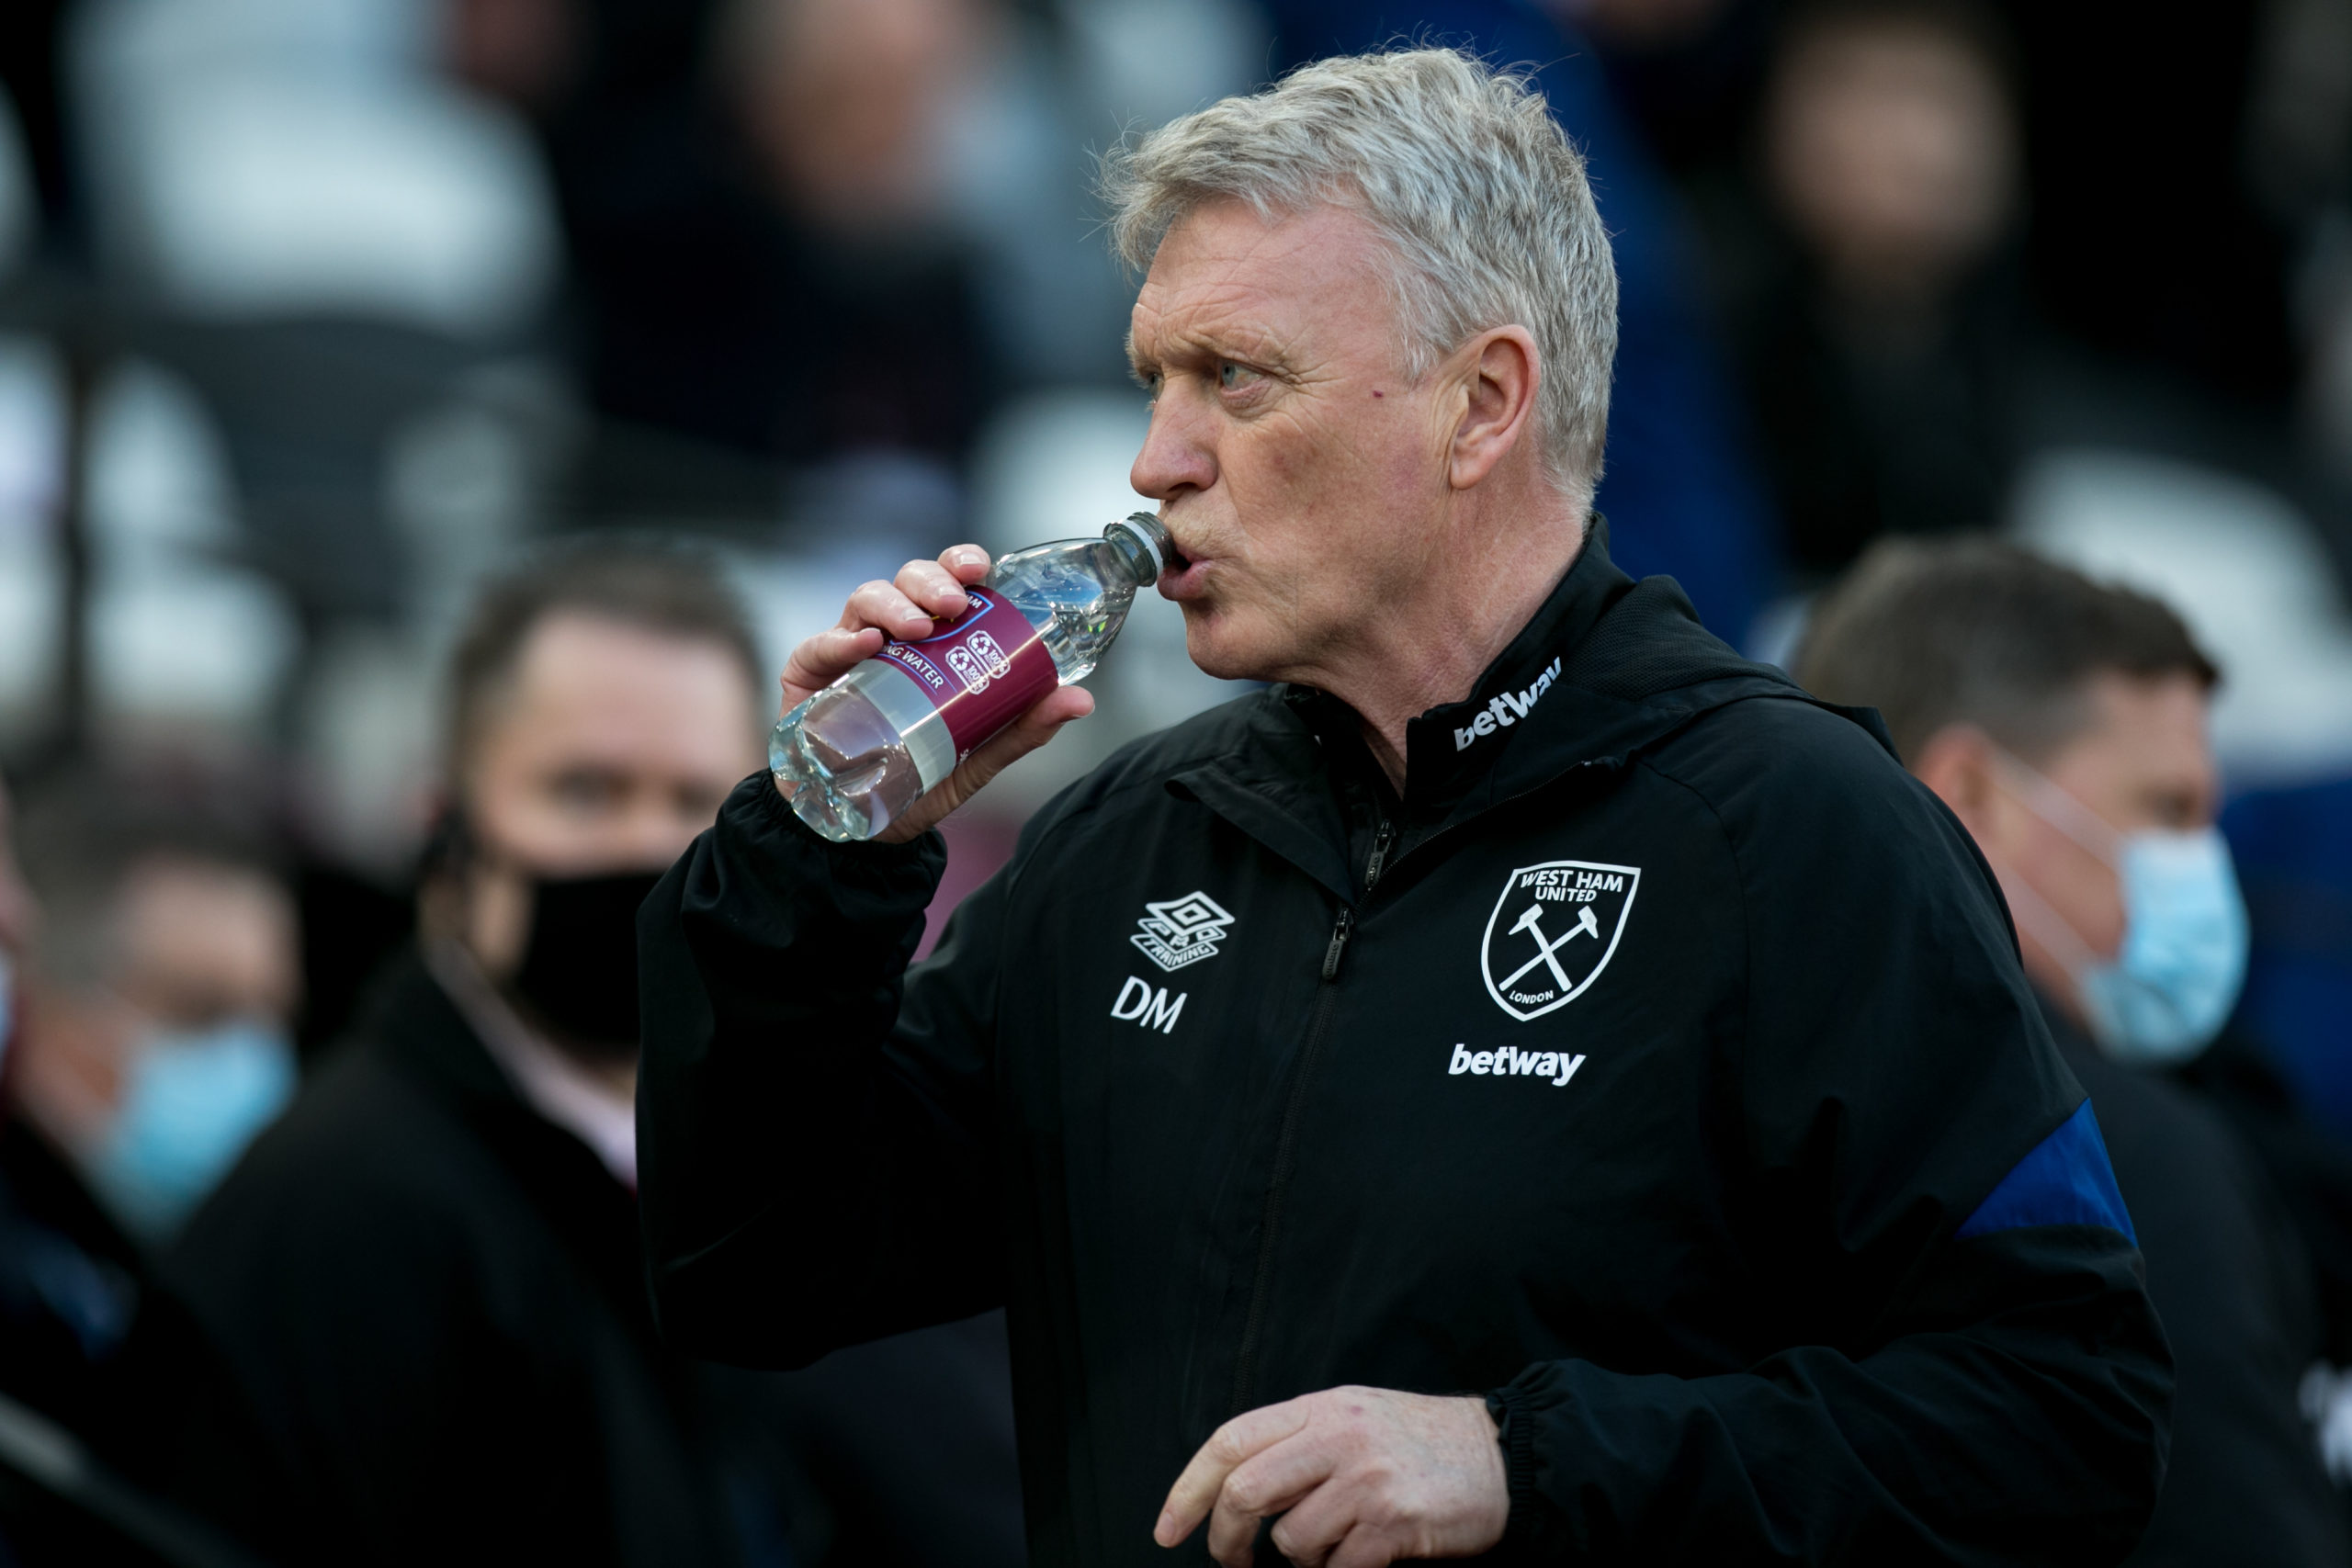 David Moyes and David Gold are clearly on the same page when it comes to transfer business